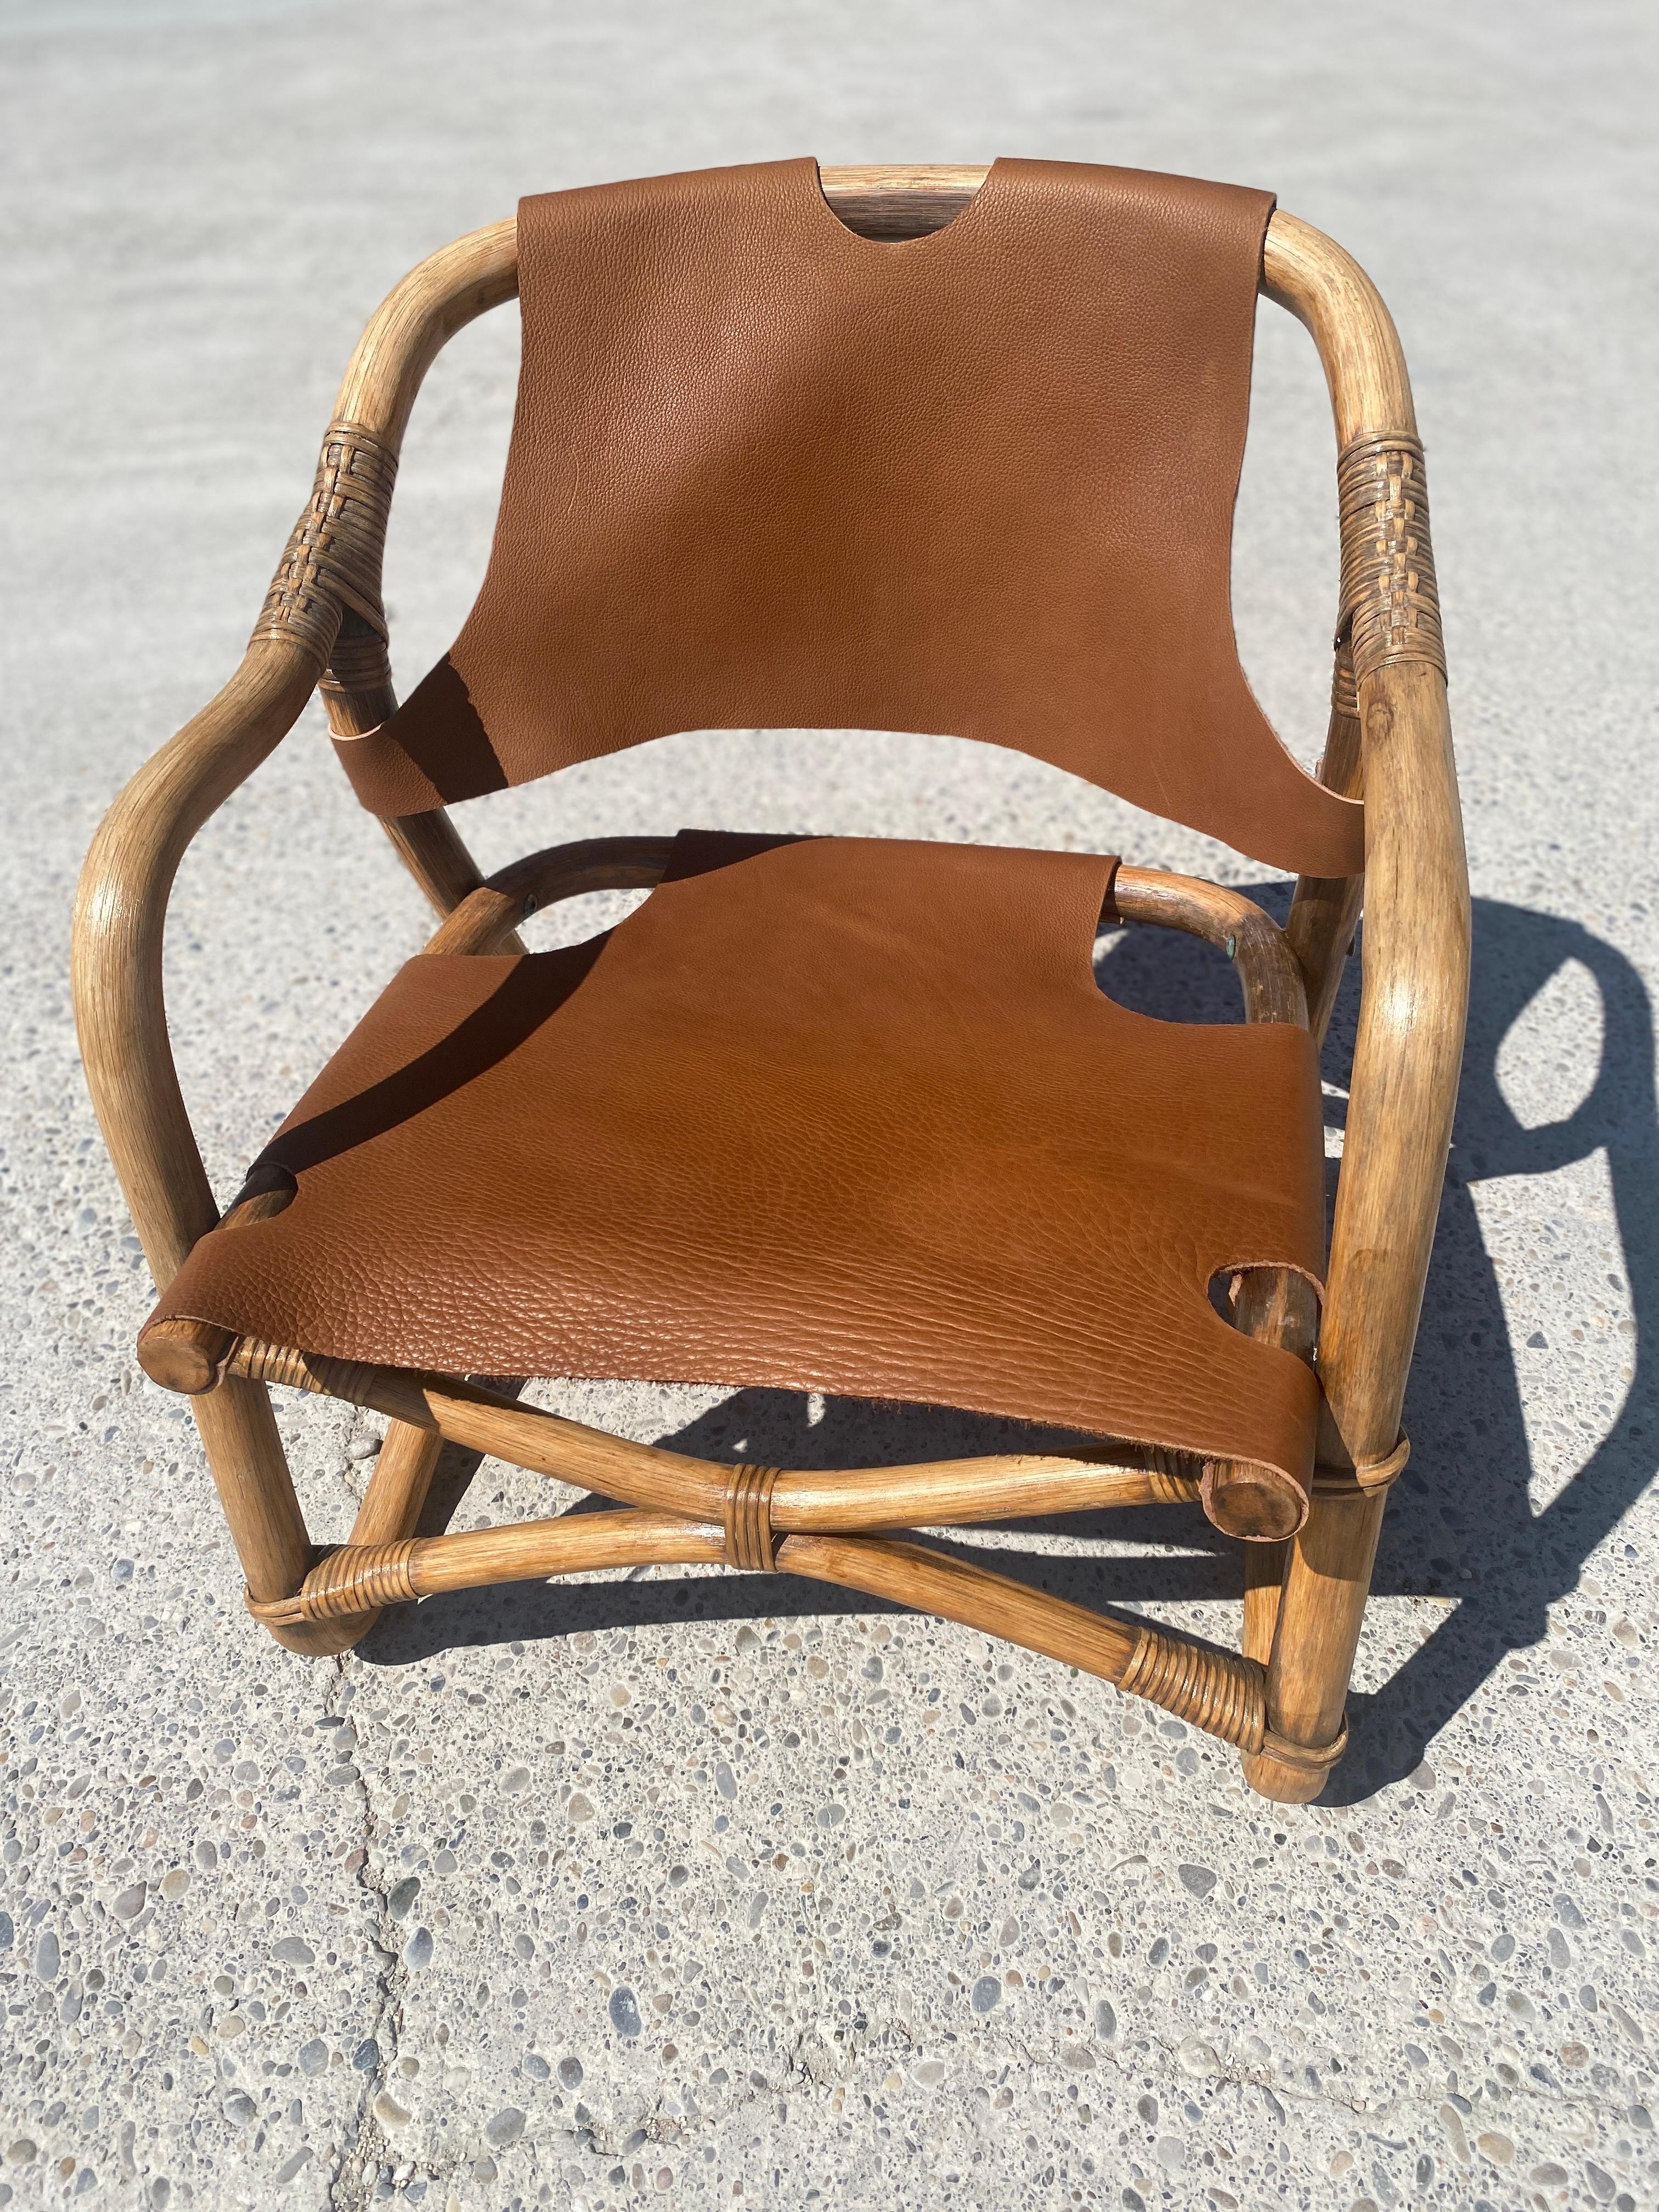 Danish bamboo safari armchair with leather seat and back. Denmark 1960. Seat and back in new cognac grained leather. Very nice workmanship. Links and structure in very good condition. Very nice workmanship.